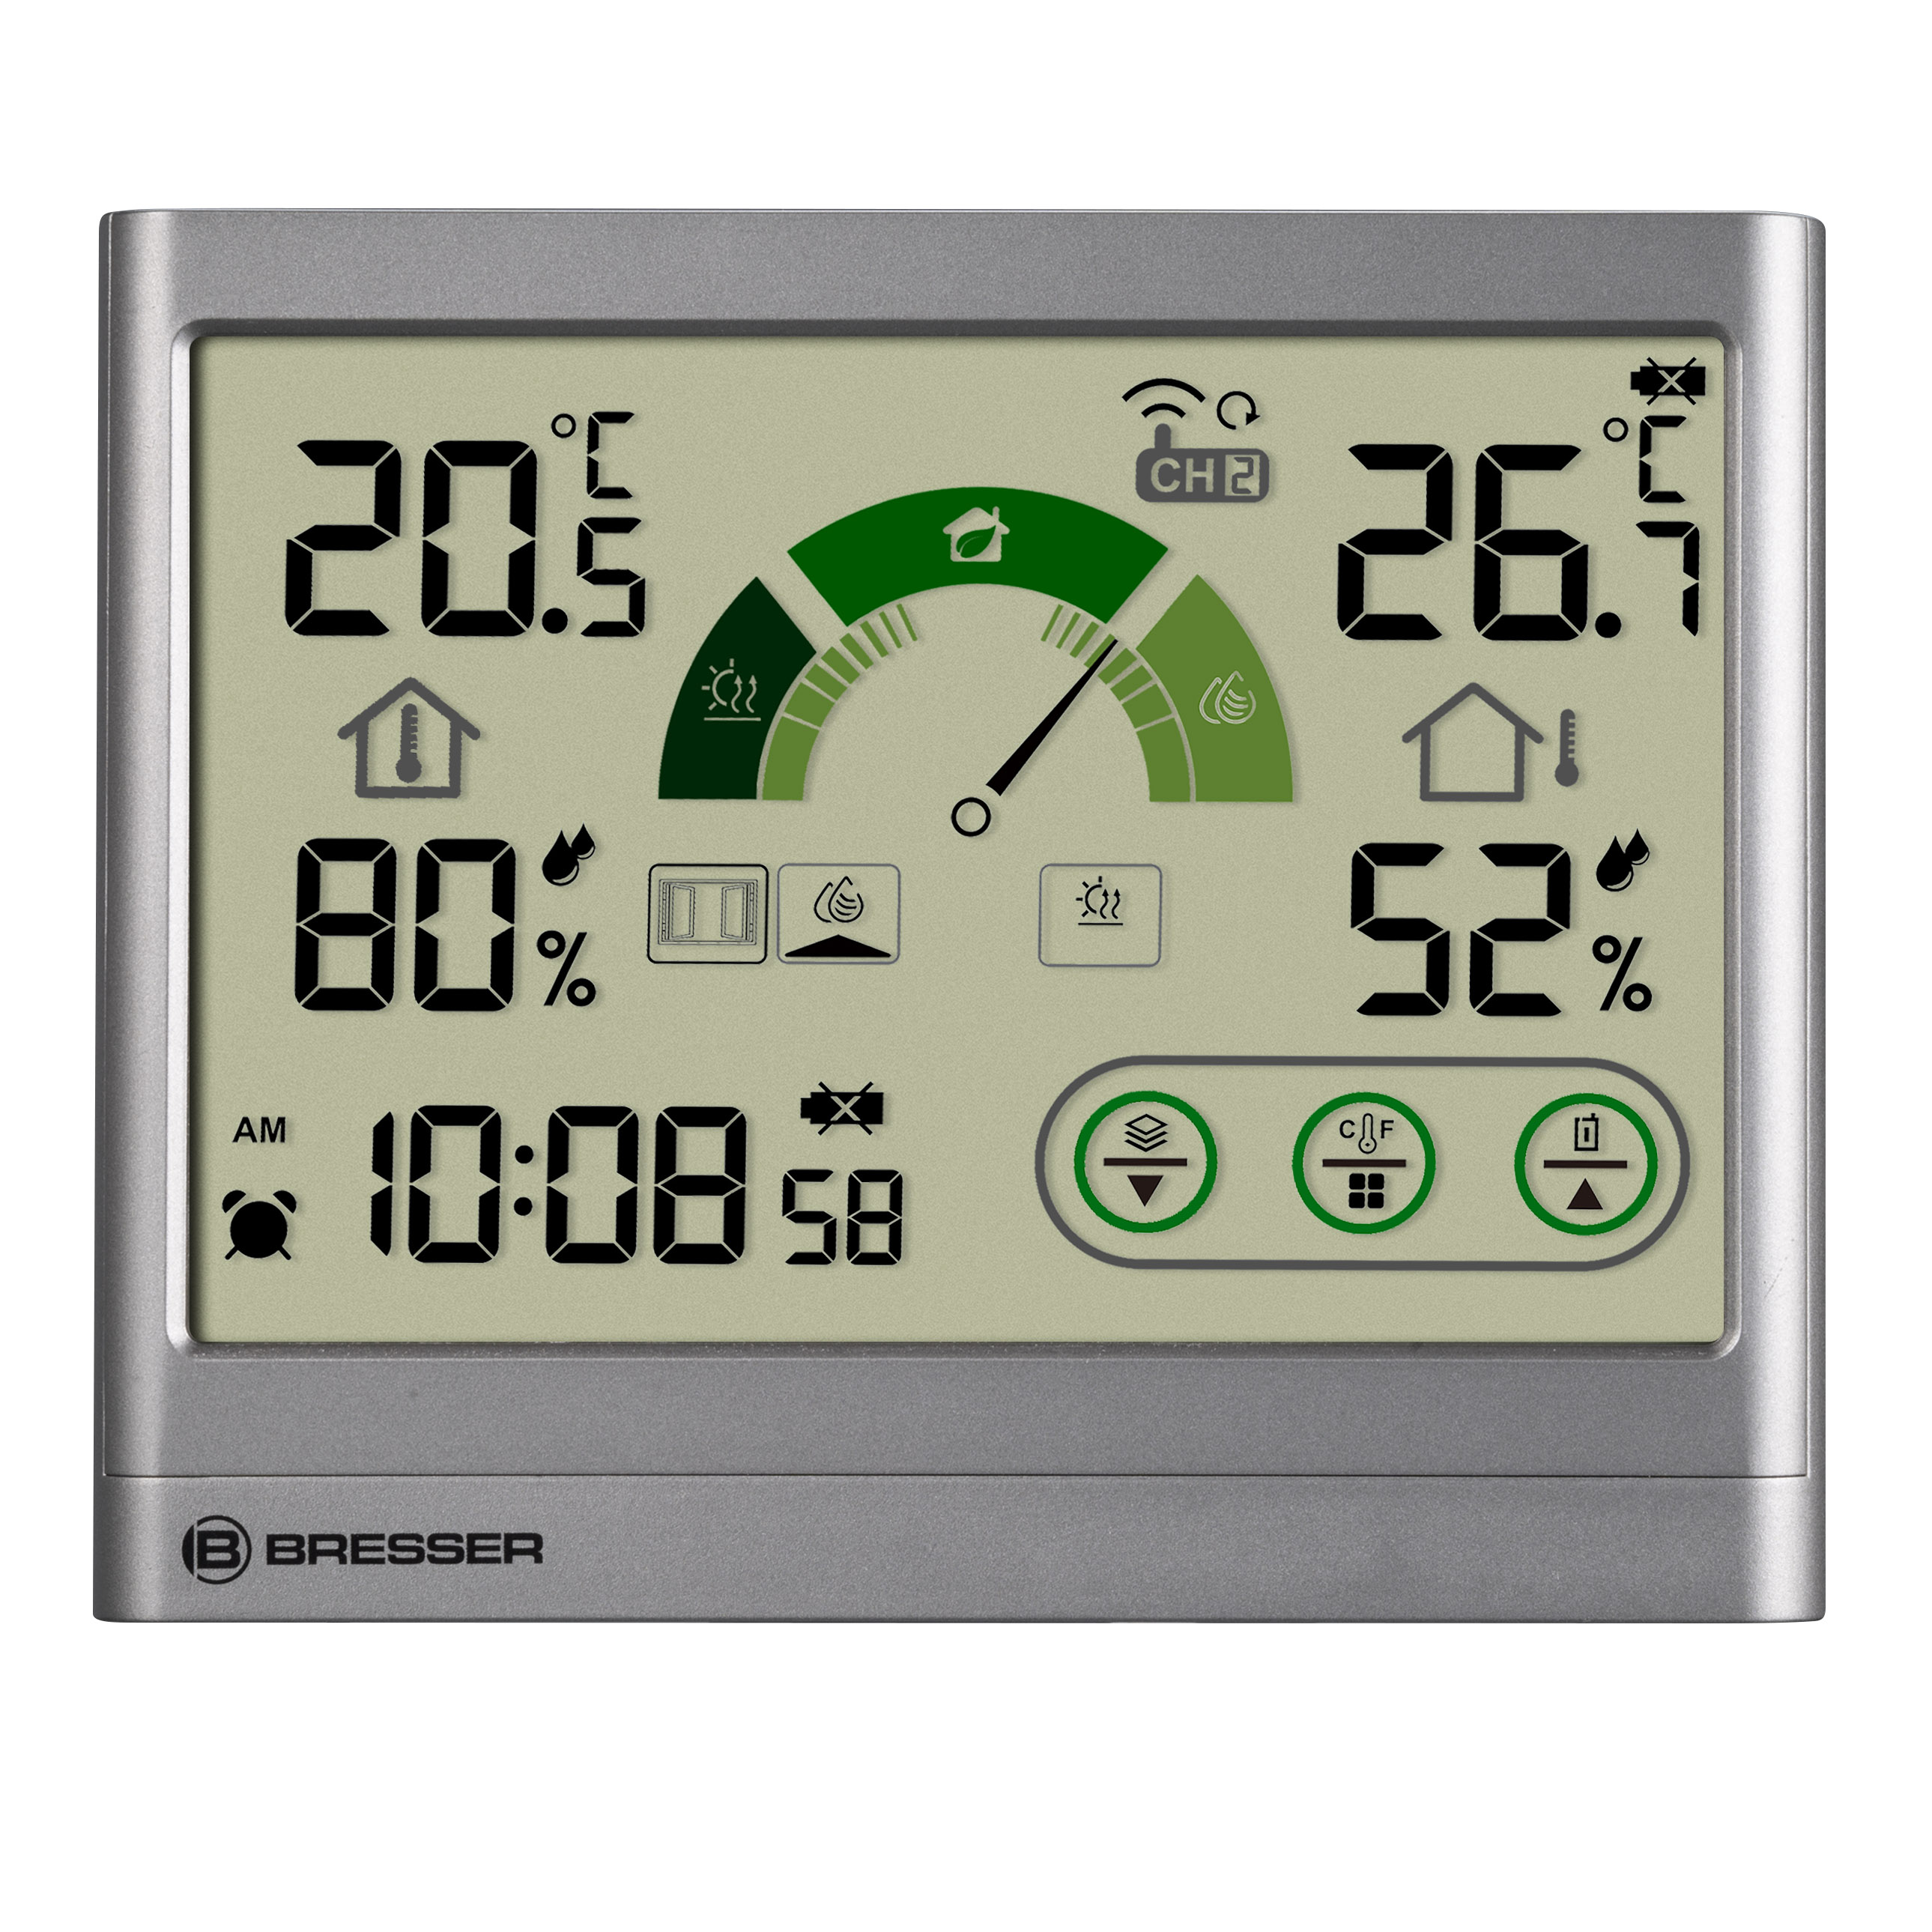 BRESSER Thermo-Hygrometer with Ventilation Recommendation VentAir H